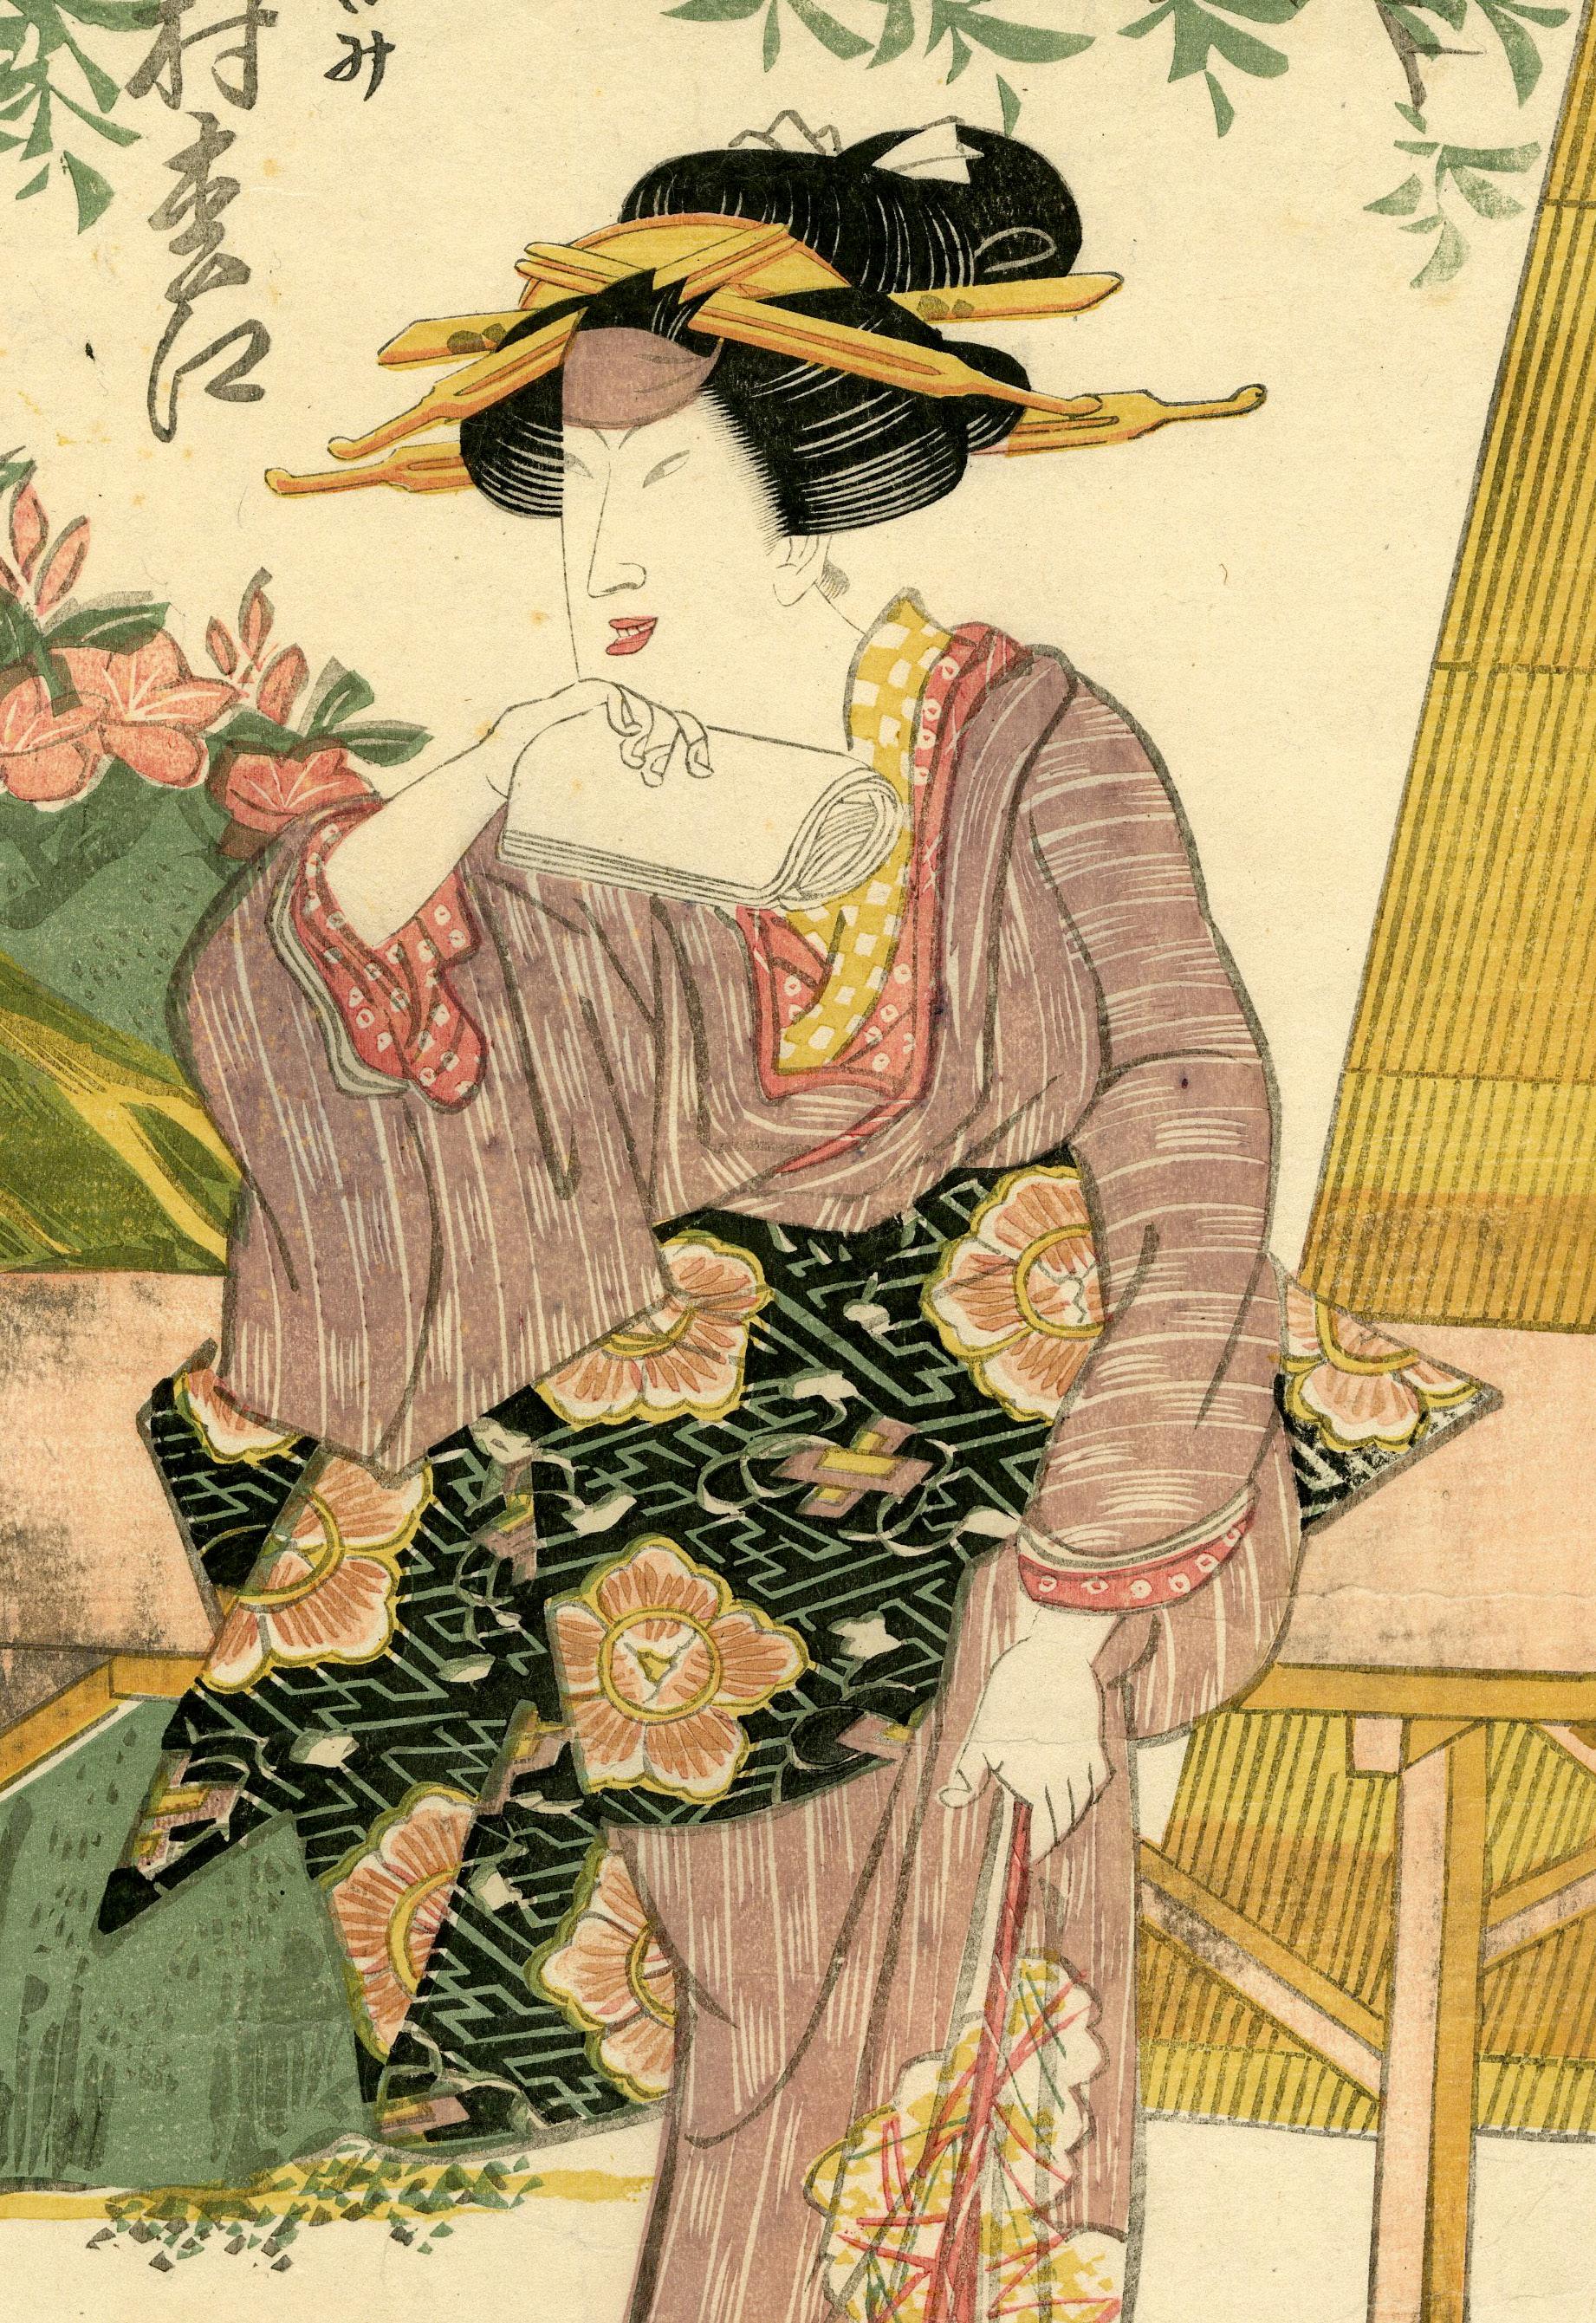 Beauty Otami - Kabuki
Note: Kabuki actor Nakamura Matsue is in the role of courtesan otami. She is standing in front of a small tea shop in a garden.
Color woodblock, c. 1800-1810
Signed by Toyokuni ga (see photo)
Publisher: Yamamotoya Heikichi